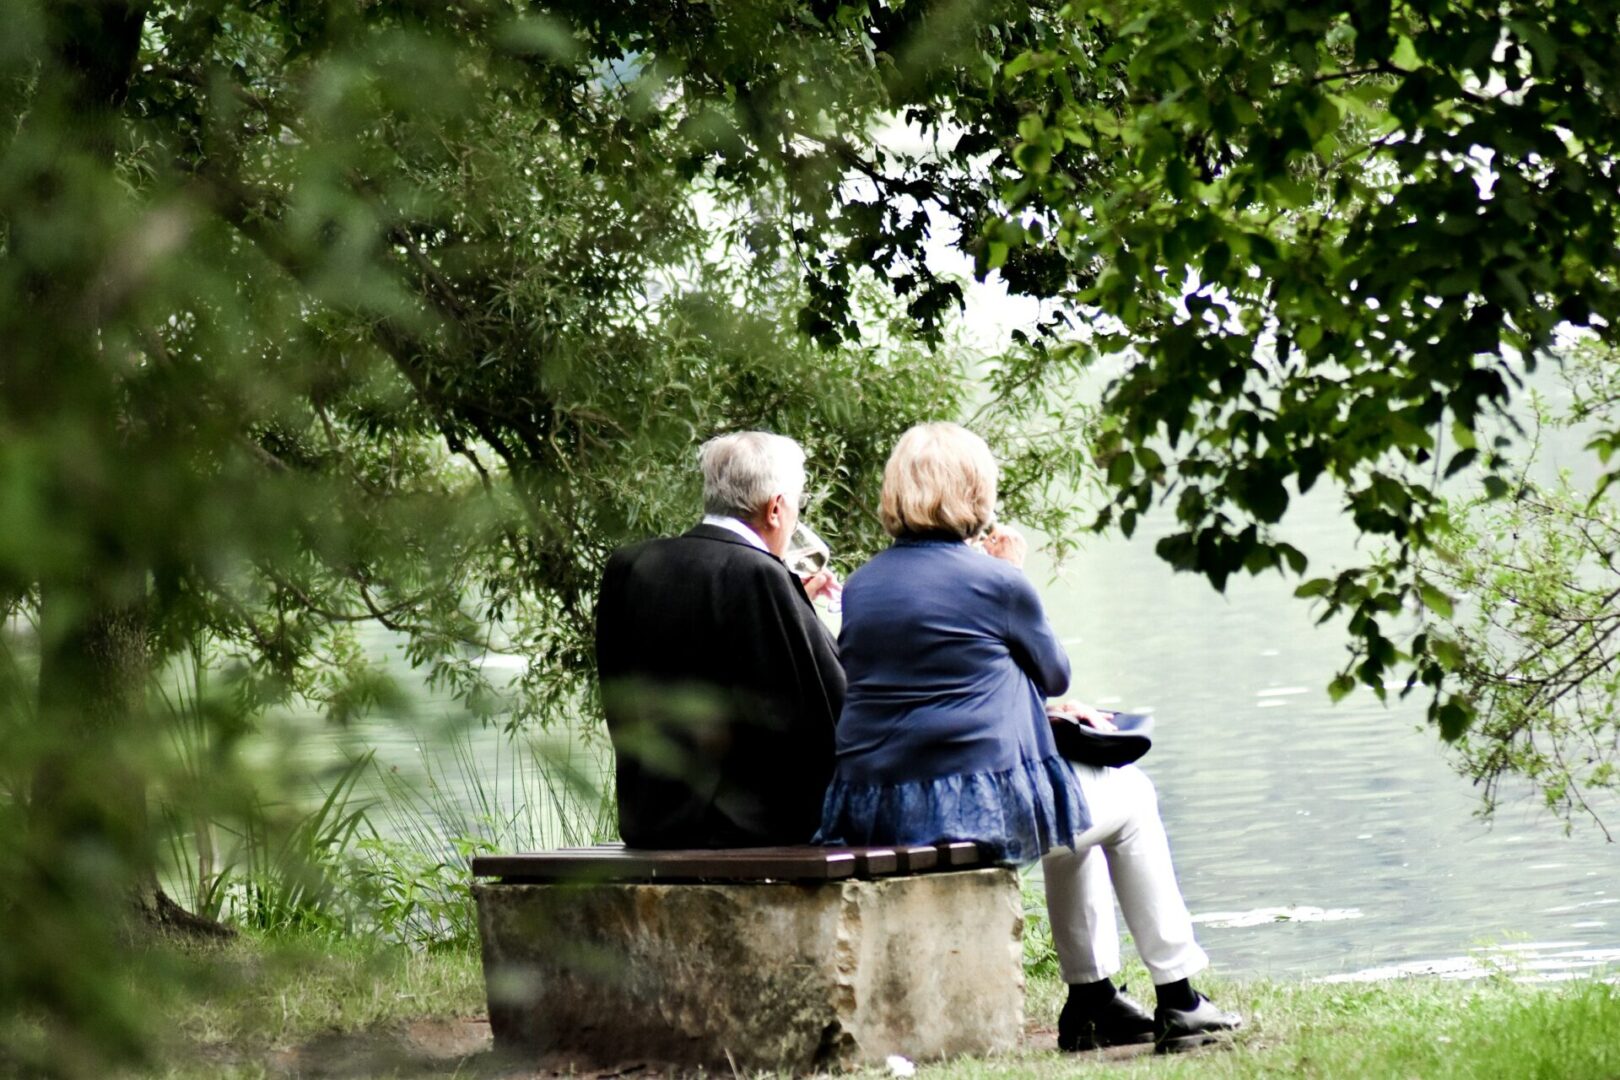 Two people sitting on a bench near the water.